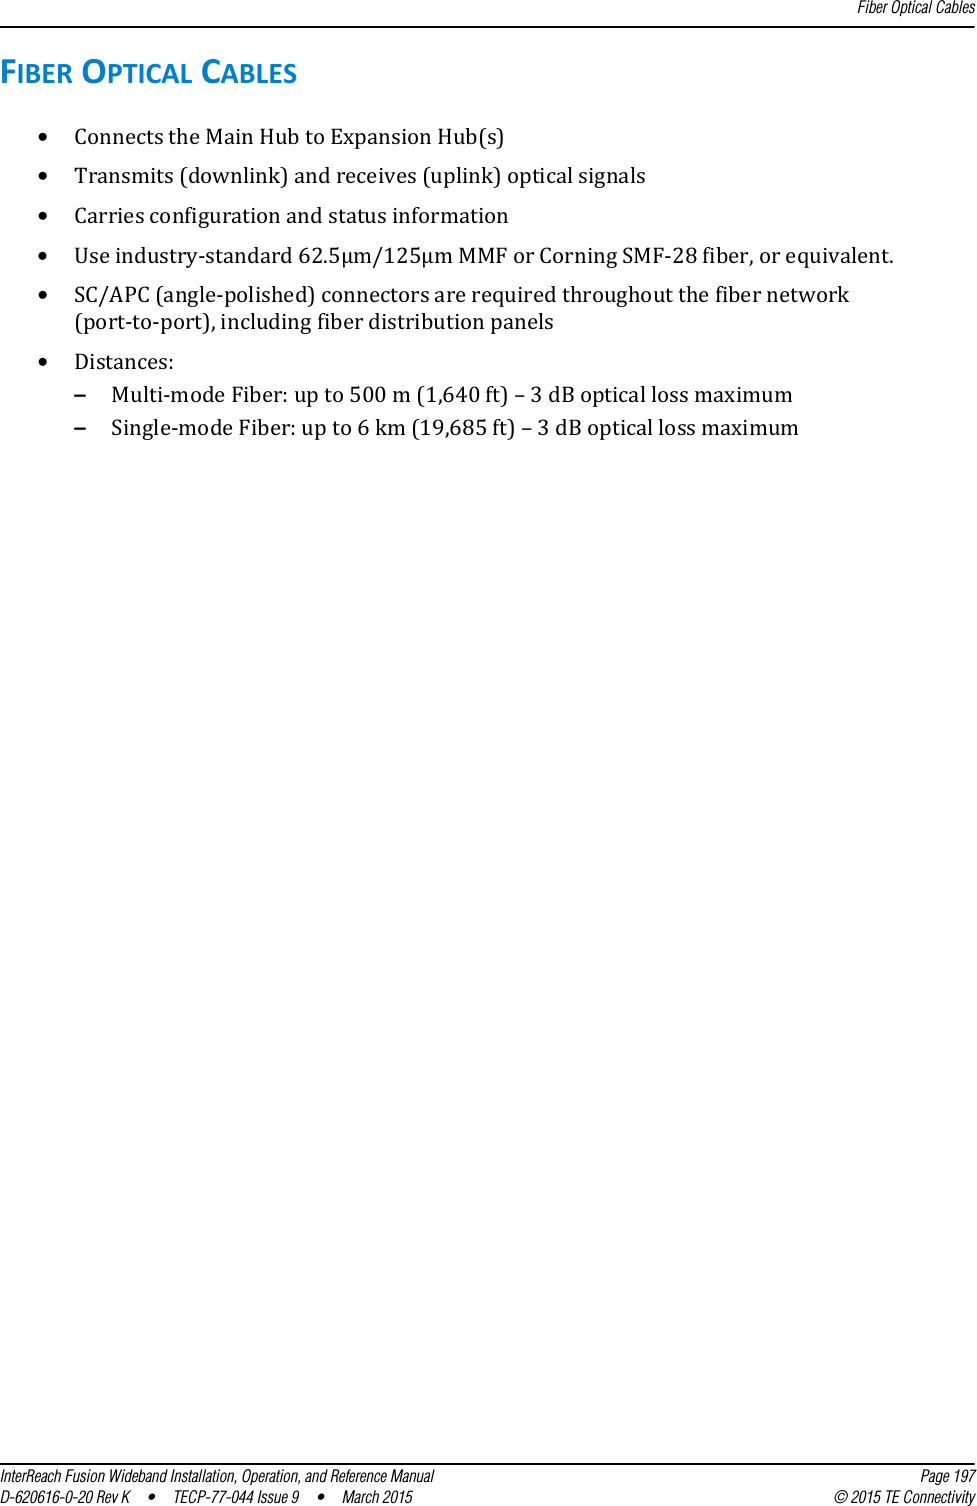 Fiber Optical CablesInterReach Fusion Wideband Installation, Operation, and Reference Manual Page 197D-620616-0-20 Rev K  •  TECP-77-044 Issue 9  •  March 2015 © 2015 TE ConnectivityFIBER OPTICAL CABLES•Connects the Main Hub to Expansion Hub(s)•Transmits (downlink) and receives (uplink) optical signals•Carries configuration and status information•Use industry-standard 62.5µm/125µm MMF or Corning SMF-28 fiber, or equivalent.•SC/APC (angle-polished) connectors are required throughout the fiber network (port-to-port), including fiber distribution panels•Distances:–Multi-mode Fiber: up to 500 m (1,640 ft) – 3 dB optical loss maximum–Single-mode Fiber: up to 6 km (19,685 ft) – 3 dB optical loss maximum